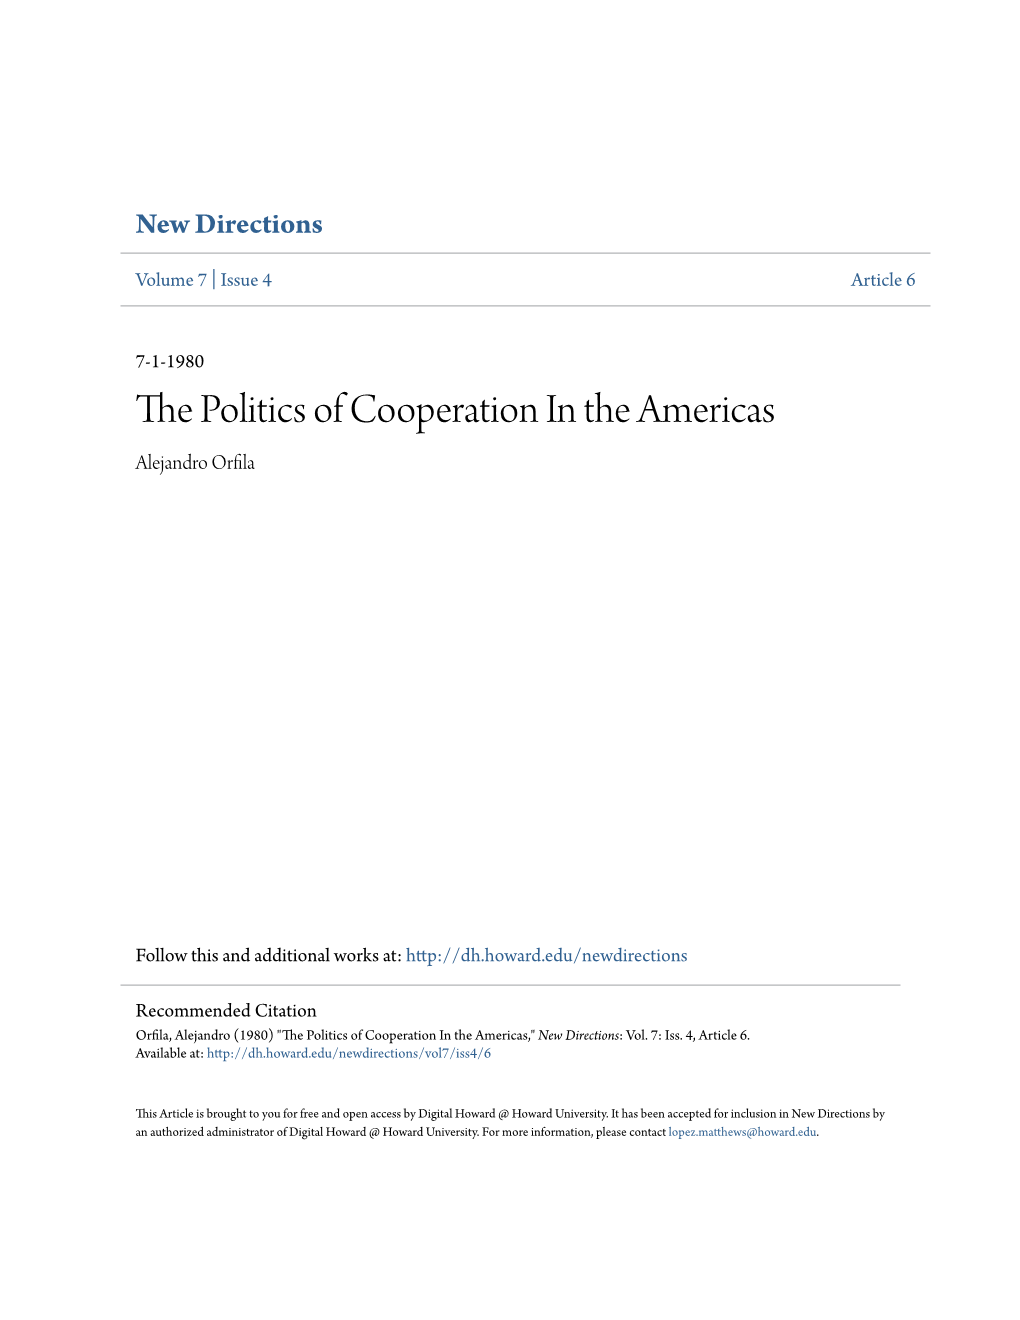 The Politics of Cooperation in the Americas